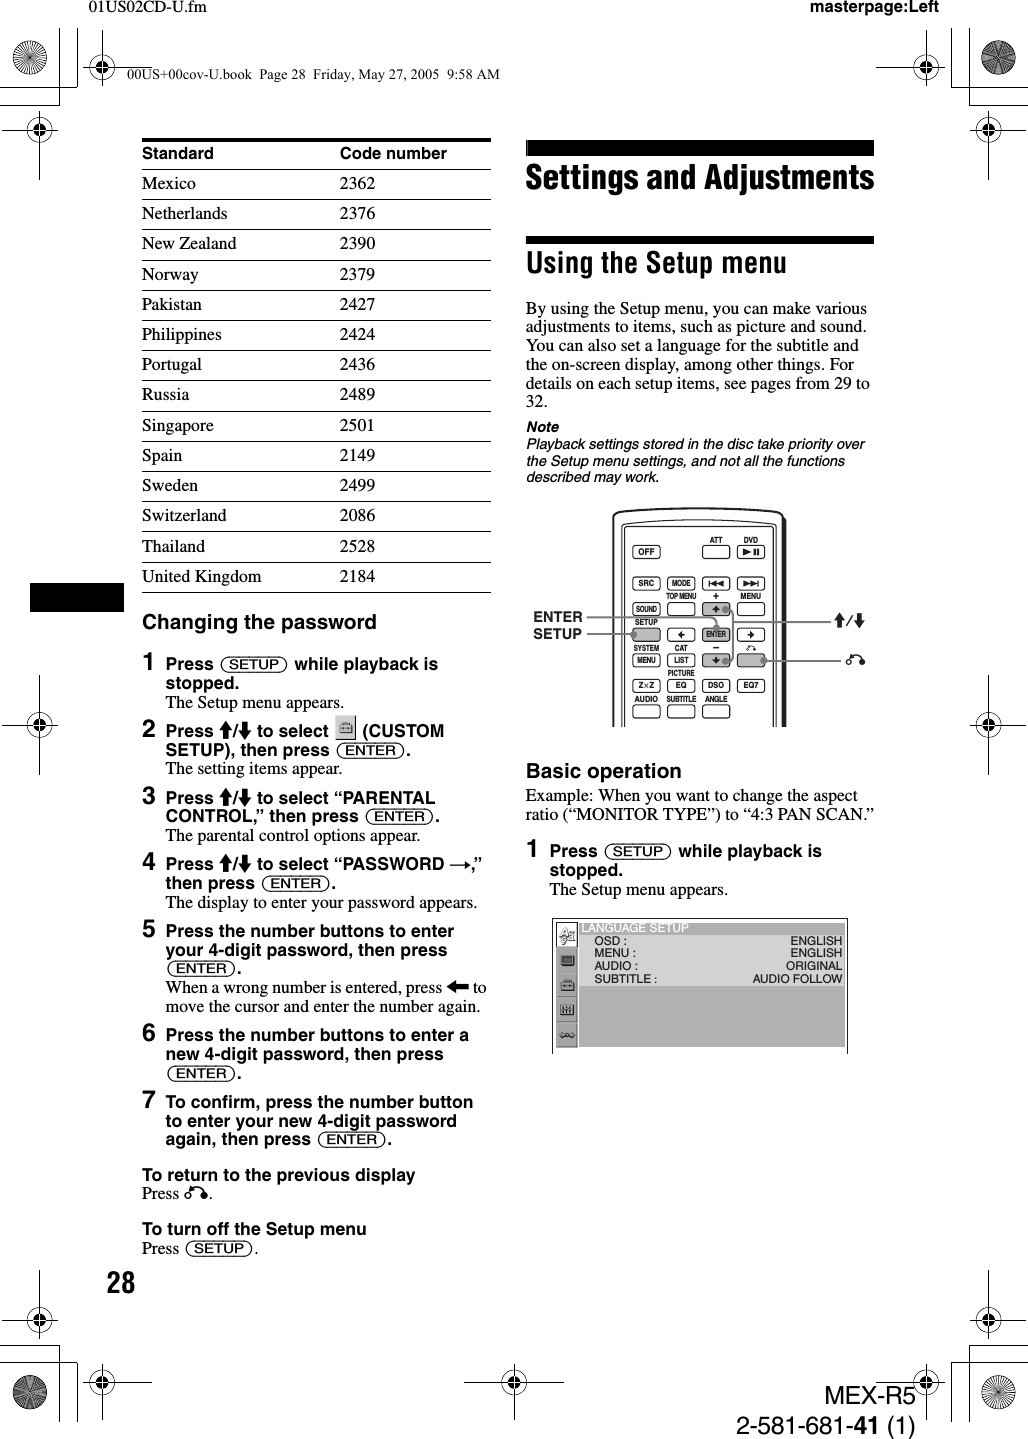 2801US02CD-U.fmMEX-R52-581-681-41 (1)masterpage:LeftChanging the password1Press (SETUP) while playback is stopped.The Setup menu appears.2Press M/m to select   (CUSTOM SETUP), then press (ENTER).The setting items appear.3Press M/m to select “PARENTAL CONTROL,” then press (ENTER).The parental control options appear.4Press M/m to select “PASSWORD t,” then press (ENTER).The display to enter your password appears.5Press the number buttons to enter your 4-digit password, then press (ENTER).When a wrong number is entered, press &lt; to move the cursor and enter the number again.6Press the number buttons to enter a new 4-digit password, then press (ENTER).7To confirm, press the number button to enter your new 4-digit password again, then press (ENTER).To return to the previous displayPress O.To turn off the Setup menuPress (SETUP).Settings and AdjustmentsUsing the Setup menuBy using the Setup menu, you can make various adjustments to items, such as picture and sound. You can also set a language for the subtitle and the on-screen display, among other things. For details on each setup items, see pages from 29 to 32.NotePlayback settings stored in the disc take priority over the Setup menu settings, and not all the functions described may work.Basic operationExample: When you want to change the aspect ratio (“MONITOR TYPE”) to “4:3 PAN SCAN.”1Press (SETUP) while playback is stopped.The Setup menu appears.Mexico 2362Netherlands 2376New Zealand 2390Norway 2379Pakistan 2427Philippines 2424Portugal 2436Russia 2489Singapore 2501Spain 2149Sweden 2499Switzerland 2086Thailand 2528United Kingdom 2184Standard Code numberSRCMODEATT DVDSOUNDTOP MENUMENUSETUPENTERSYSTEMMENU LISTCATEQZ × Z DSO EQ7PICTUREAUDIOSUBTITLEANGLEOFF+–ENTERSETUP M/mOLANGUAGE SETUP    OSD :    MENU :    AUDIO :    SUBTITLE :ENGLISHENGLISHORIGINALAUDIO FOLLOW00US+00cov-U.book  Page 28  Friday, May 27, 2005  9:58 AM